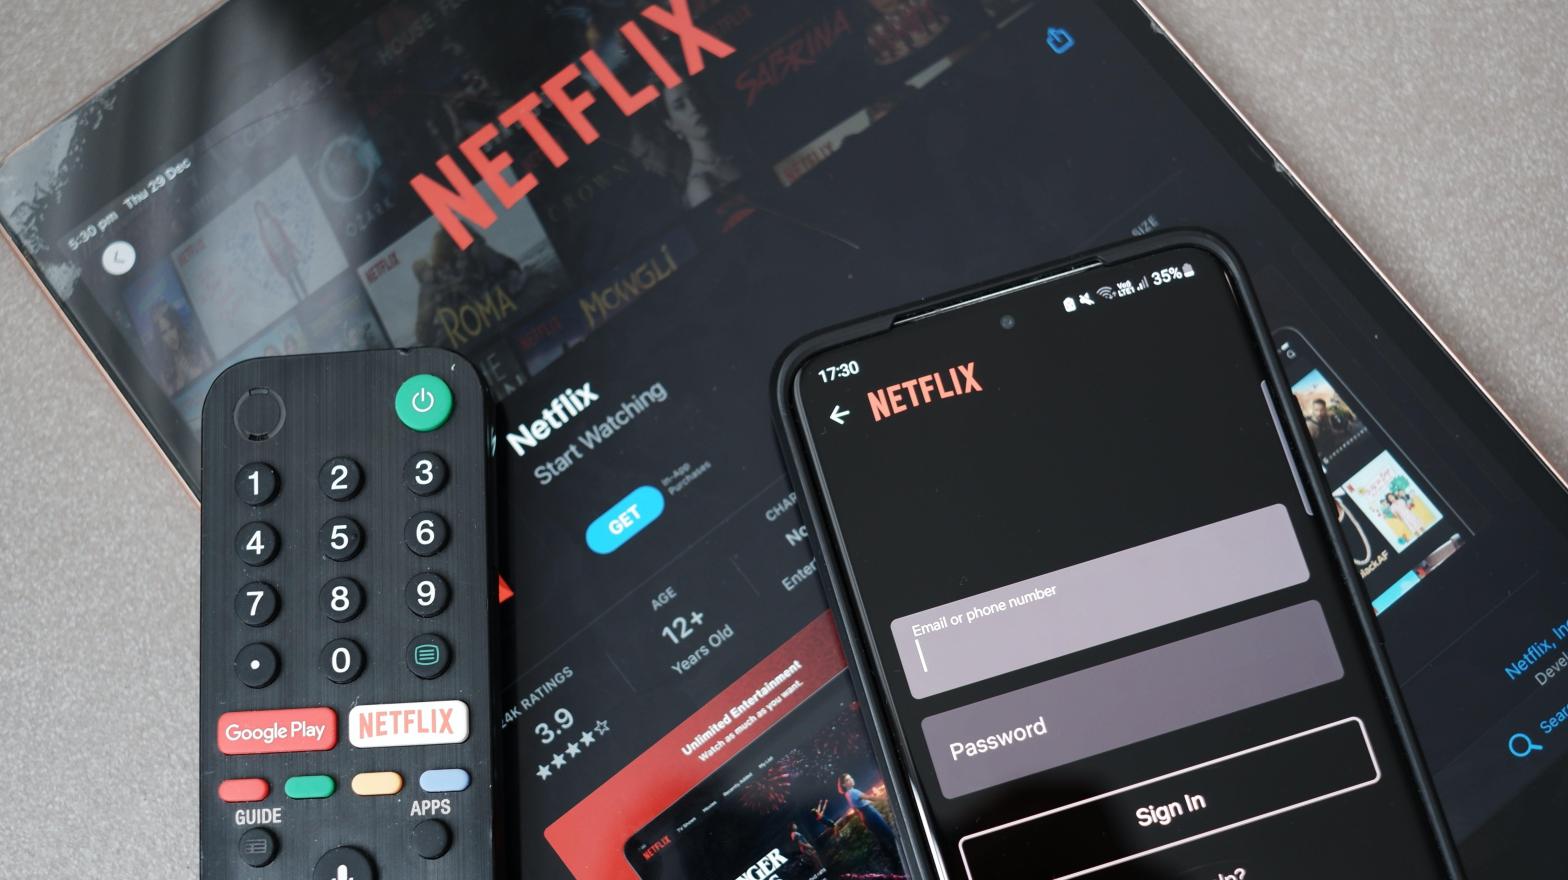 According to the latest page Netflix has on password sharing, Netflix users need to periodically reverify devices not connected to the primary home IP address. (Photo: wisely, Shutterstock)